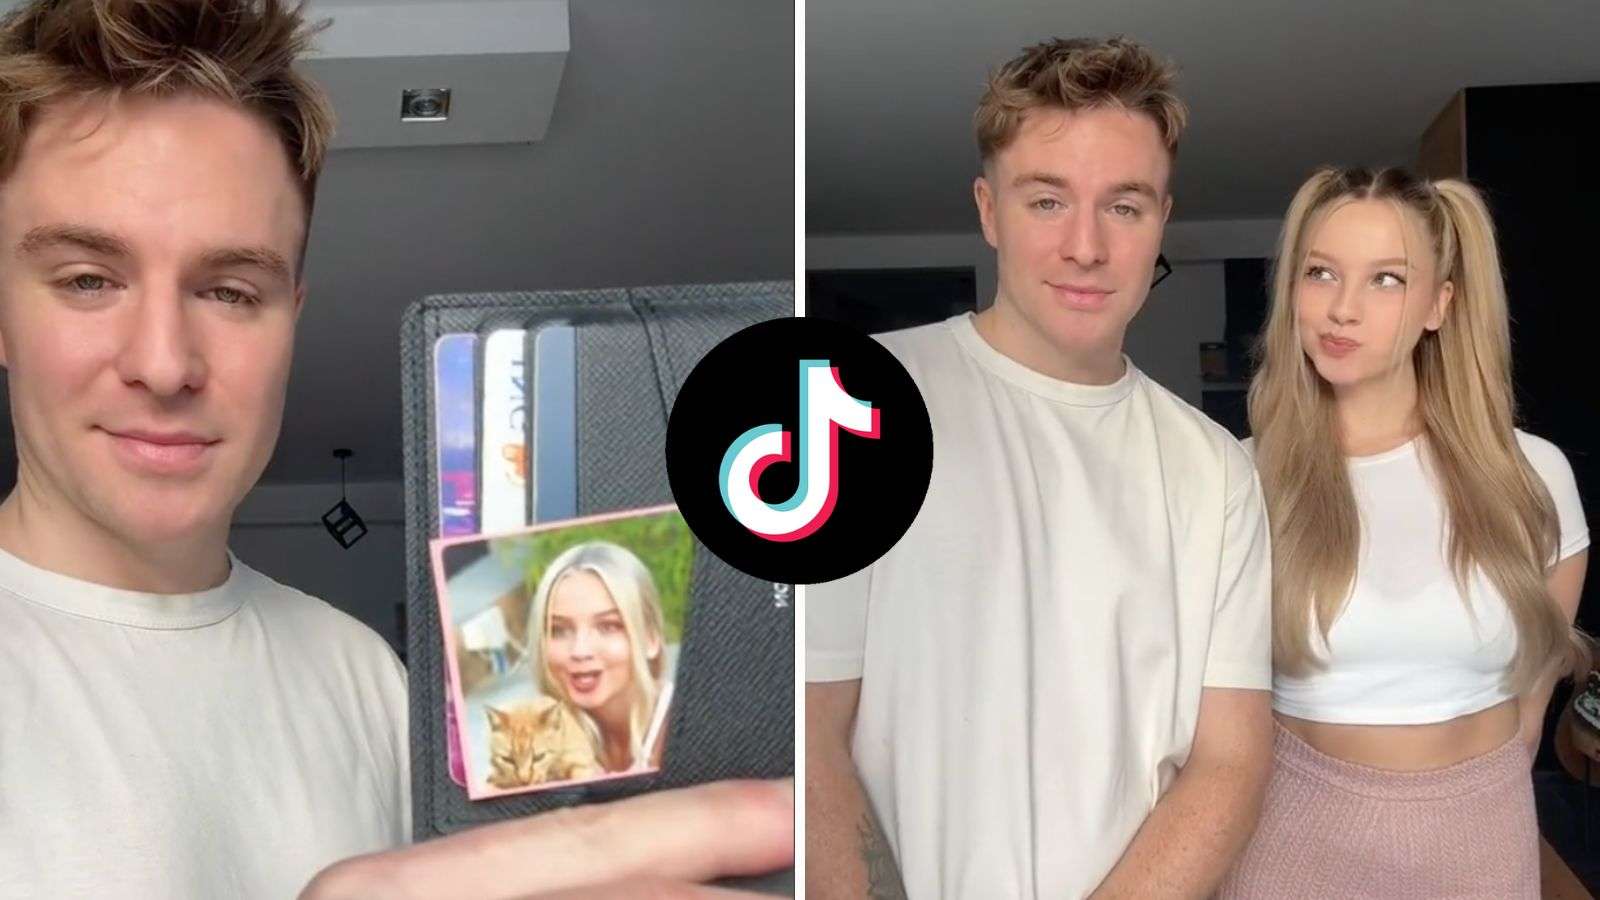 What is the ‘Take a look at my girlfriend’ TikTok trend?